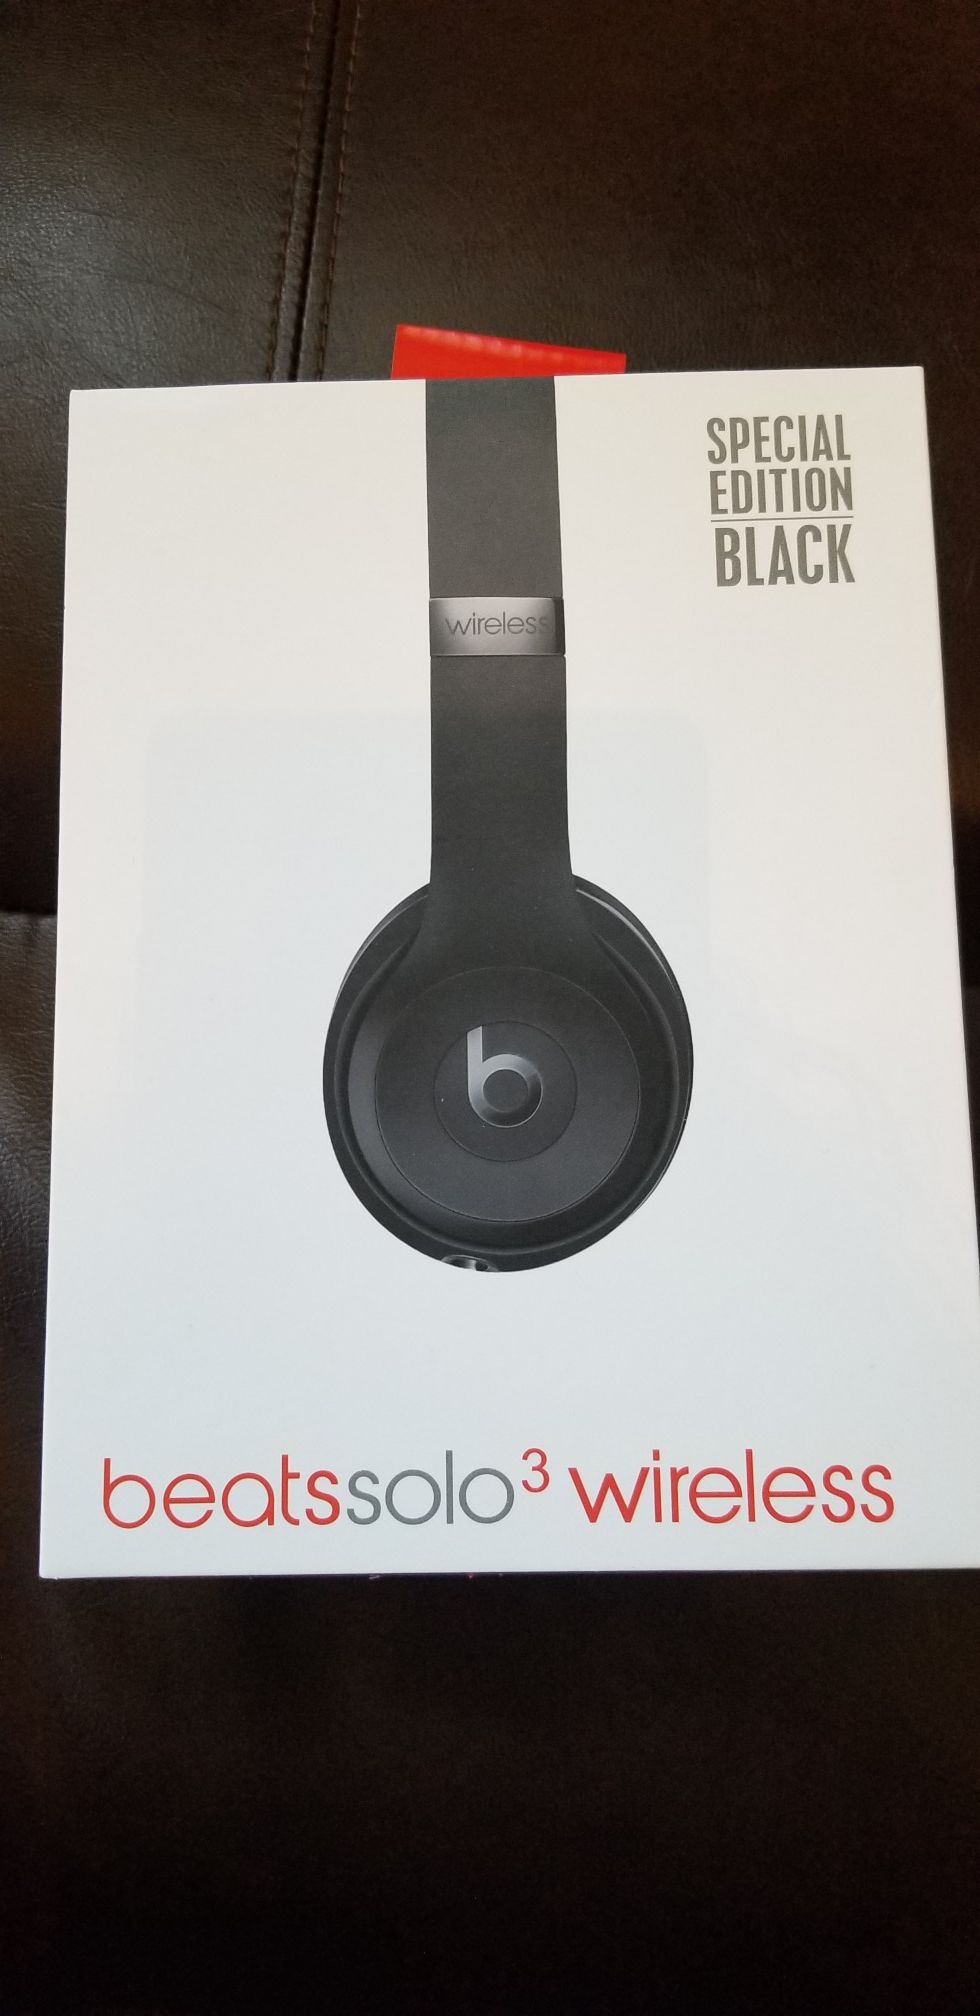 Brand New Beats solo 3 wireless bluetooth Headphones comes in Black and Red